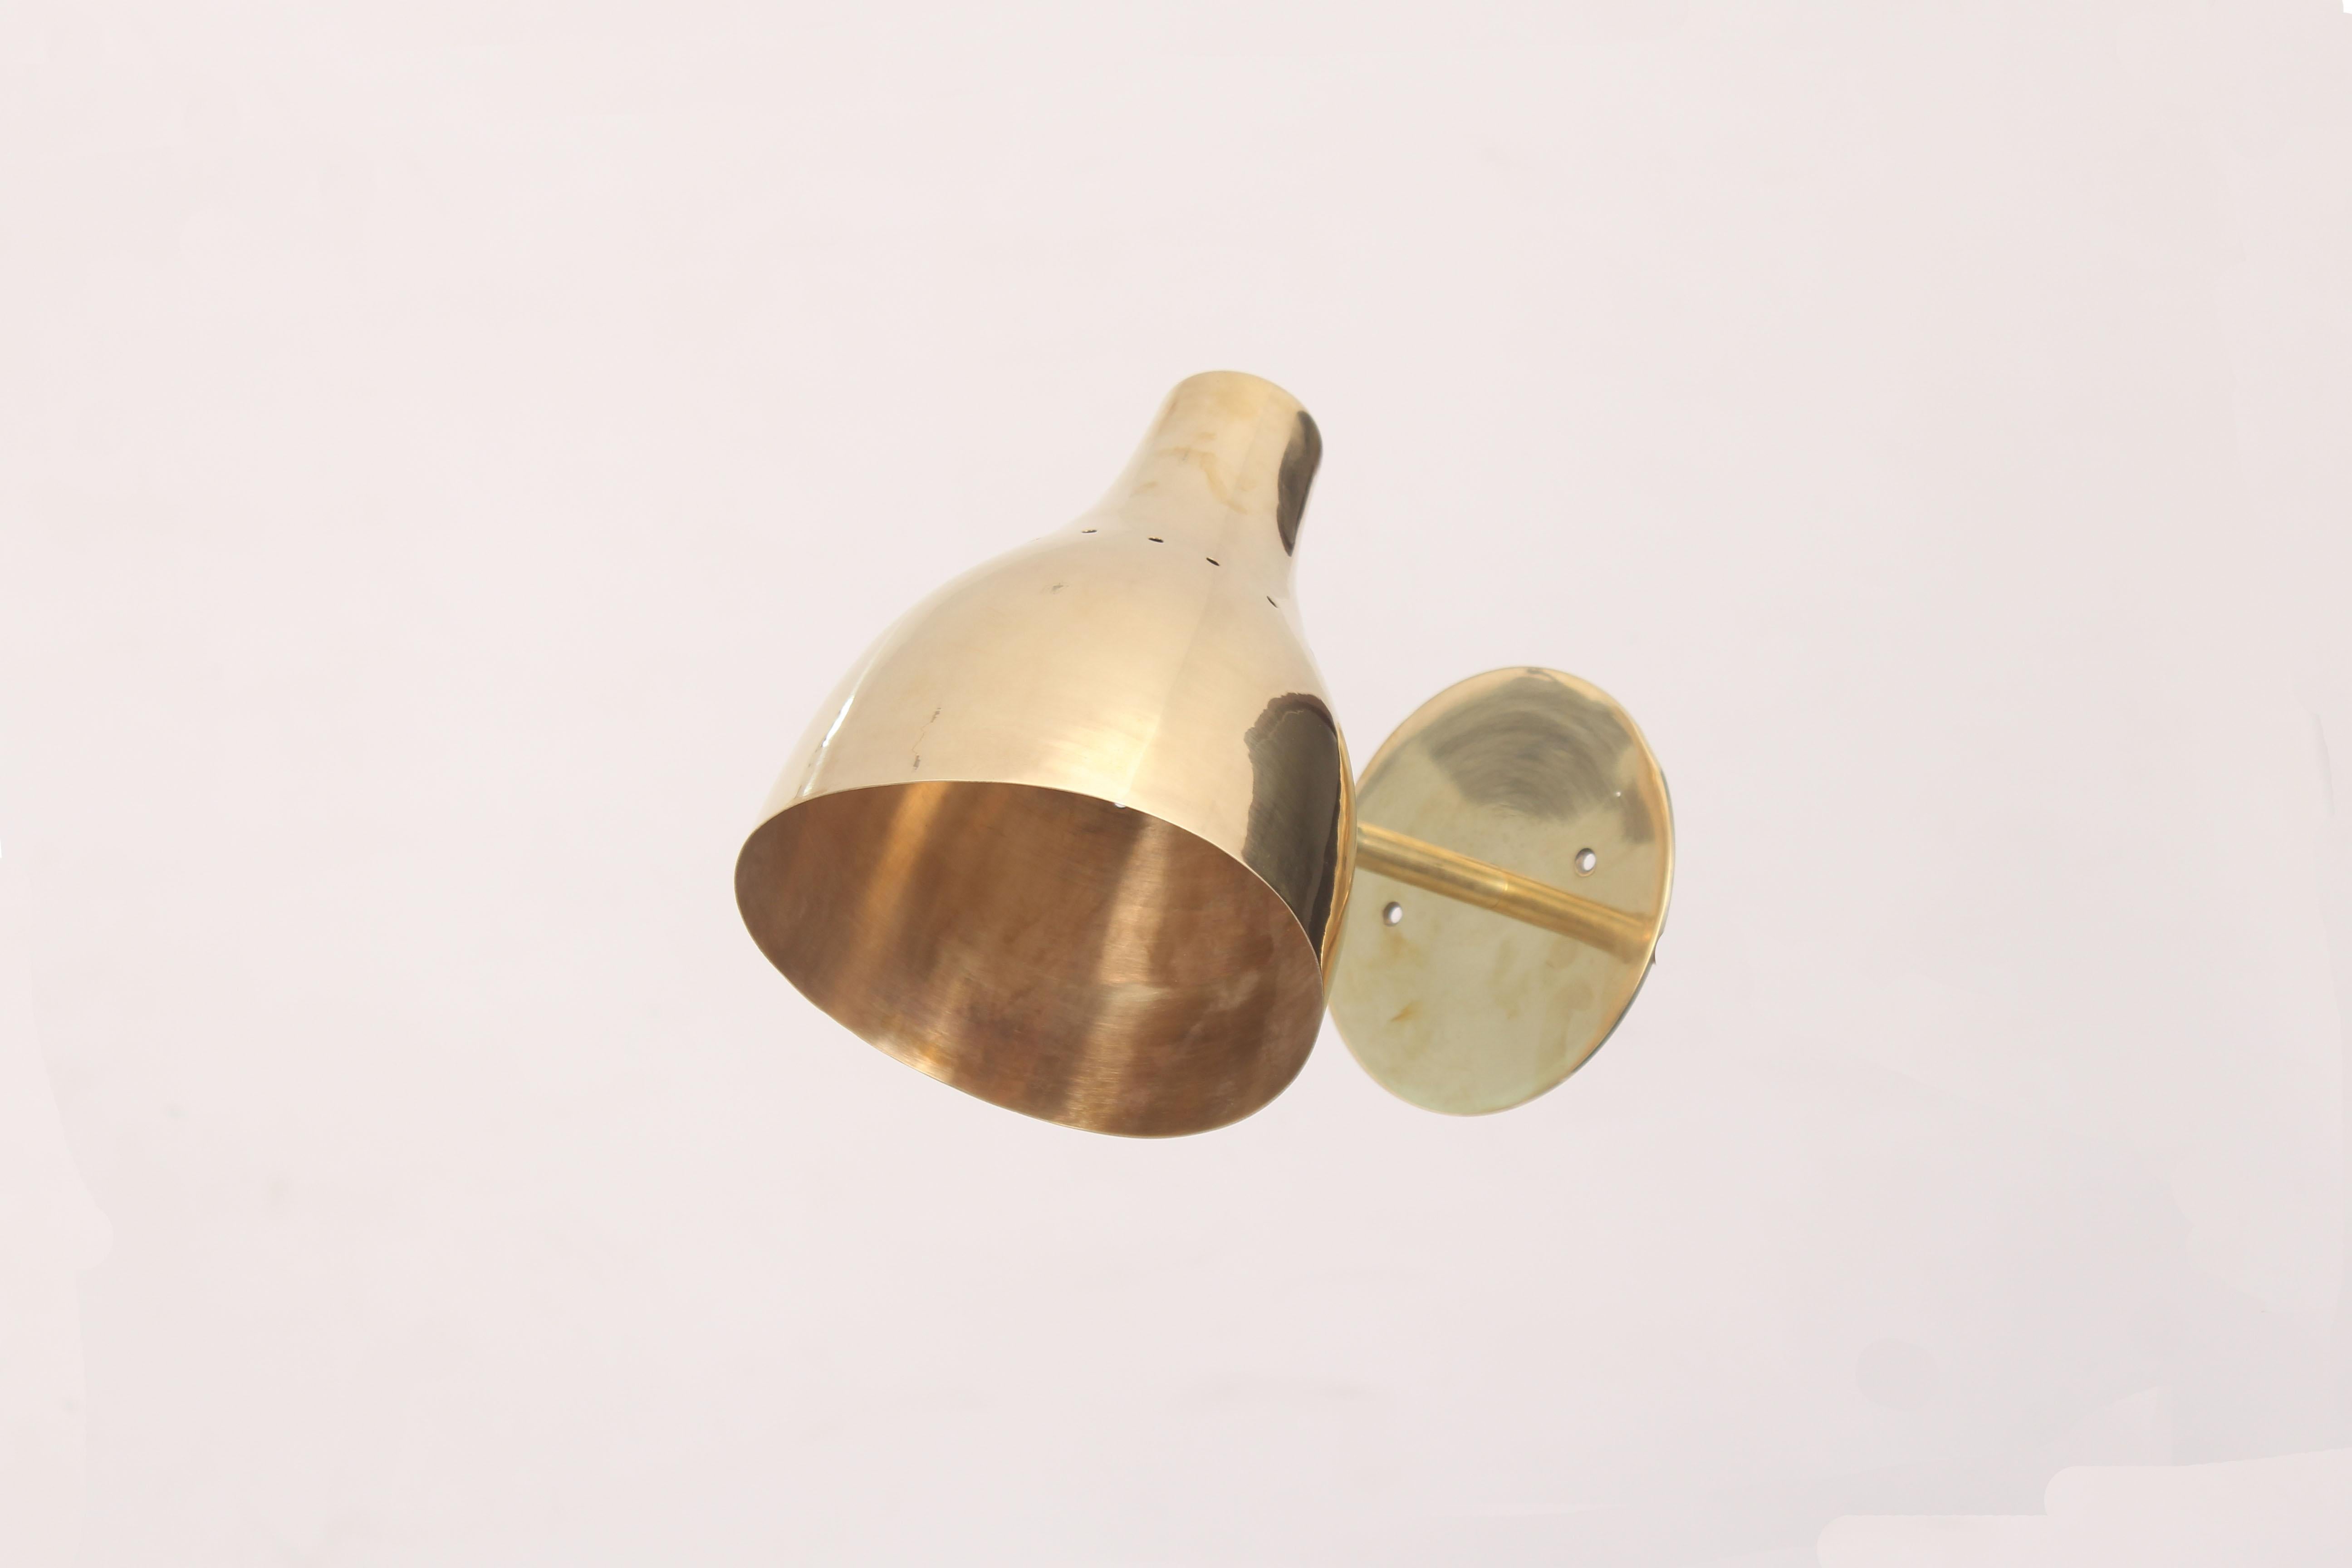 Elegant 50s style  wall sconces showed here in raw brass . 

Available in various brass finish and metal colored shade . 

Made with prime quality material and hardware . 

Solid sturdy  construction . 

Arm measure 4 in. long , shade 7 in. high by